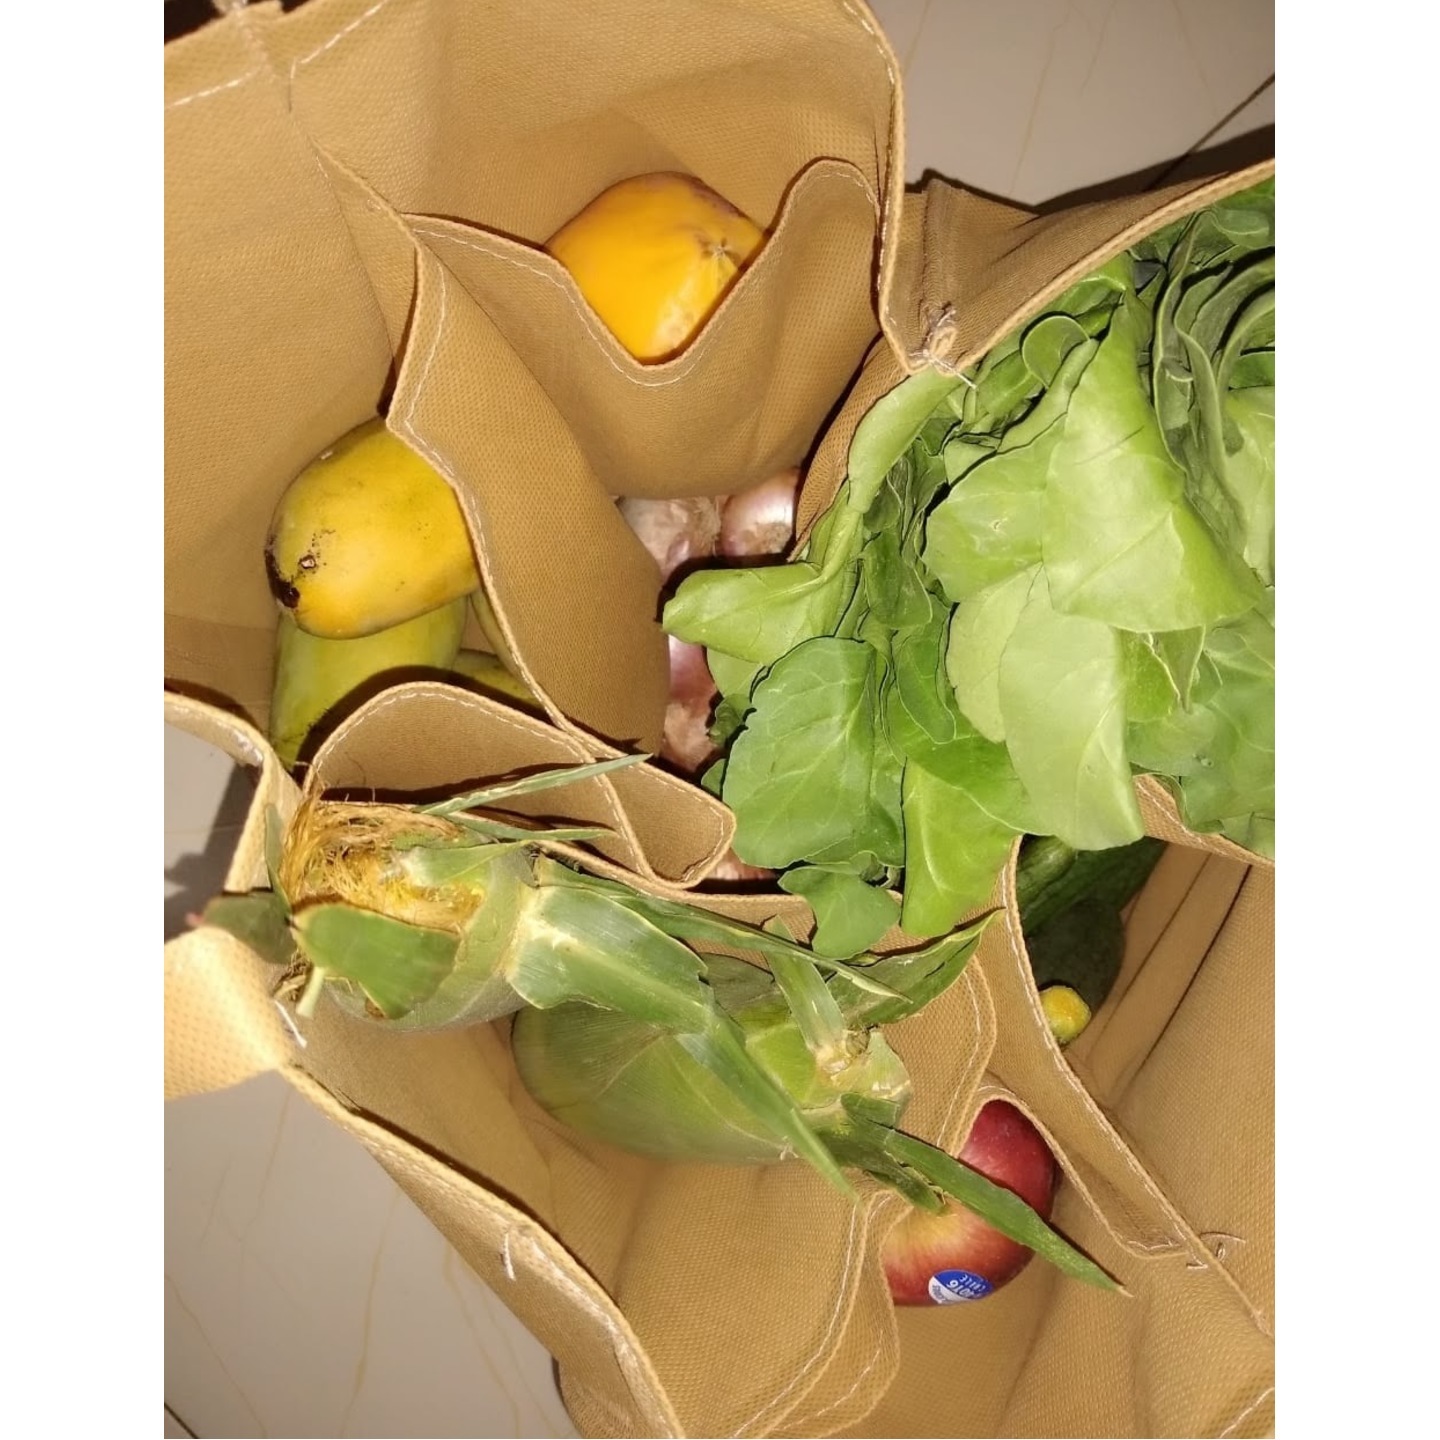 JonPrix 1 PC, Vegetable, Grocery Bag With 6 Pockets